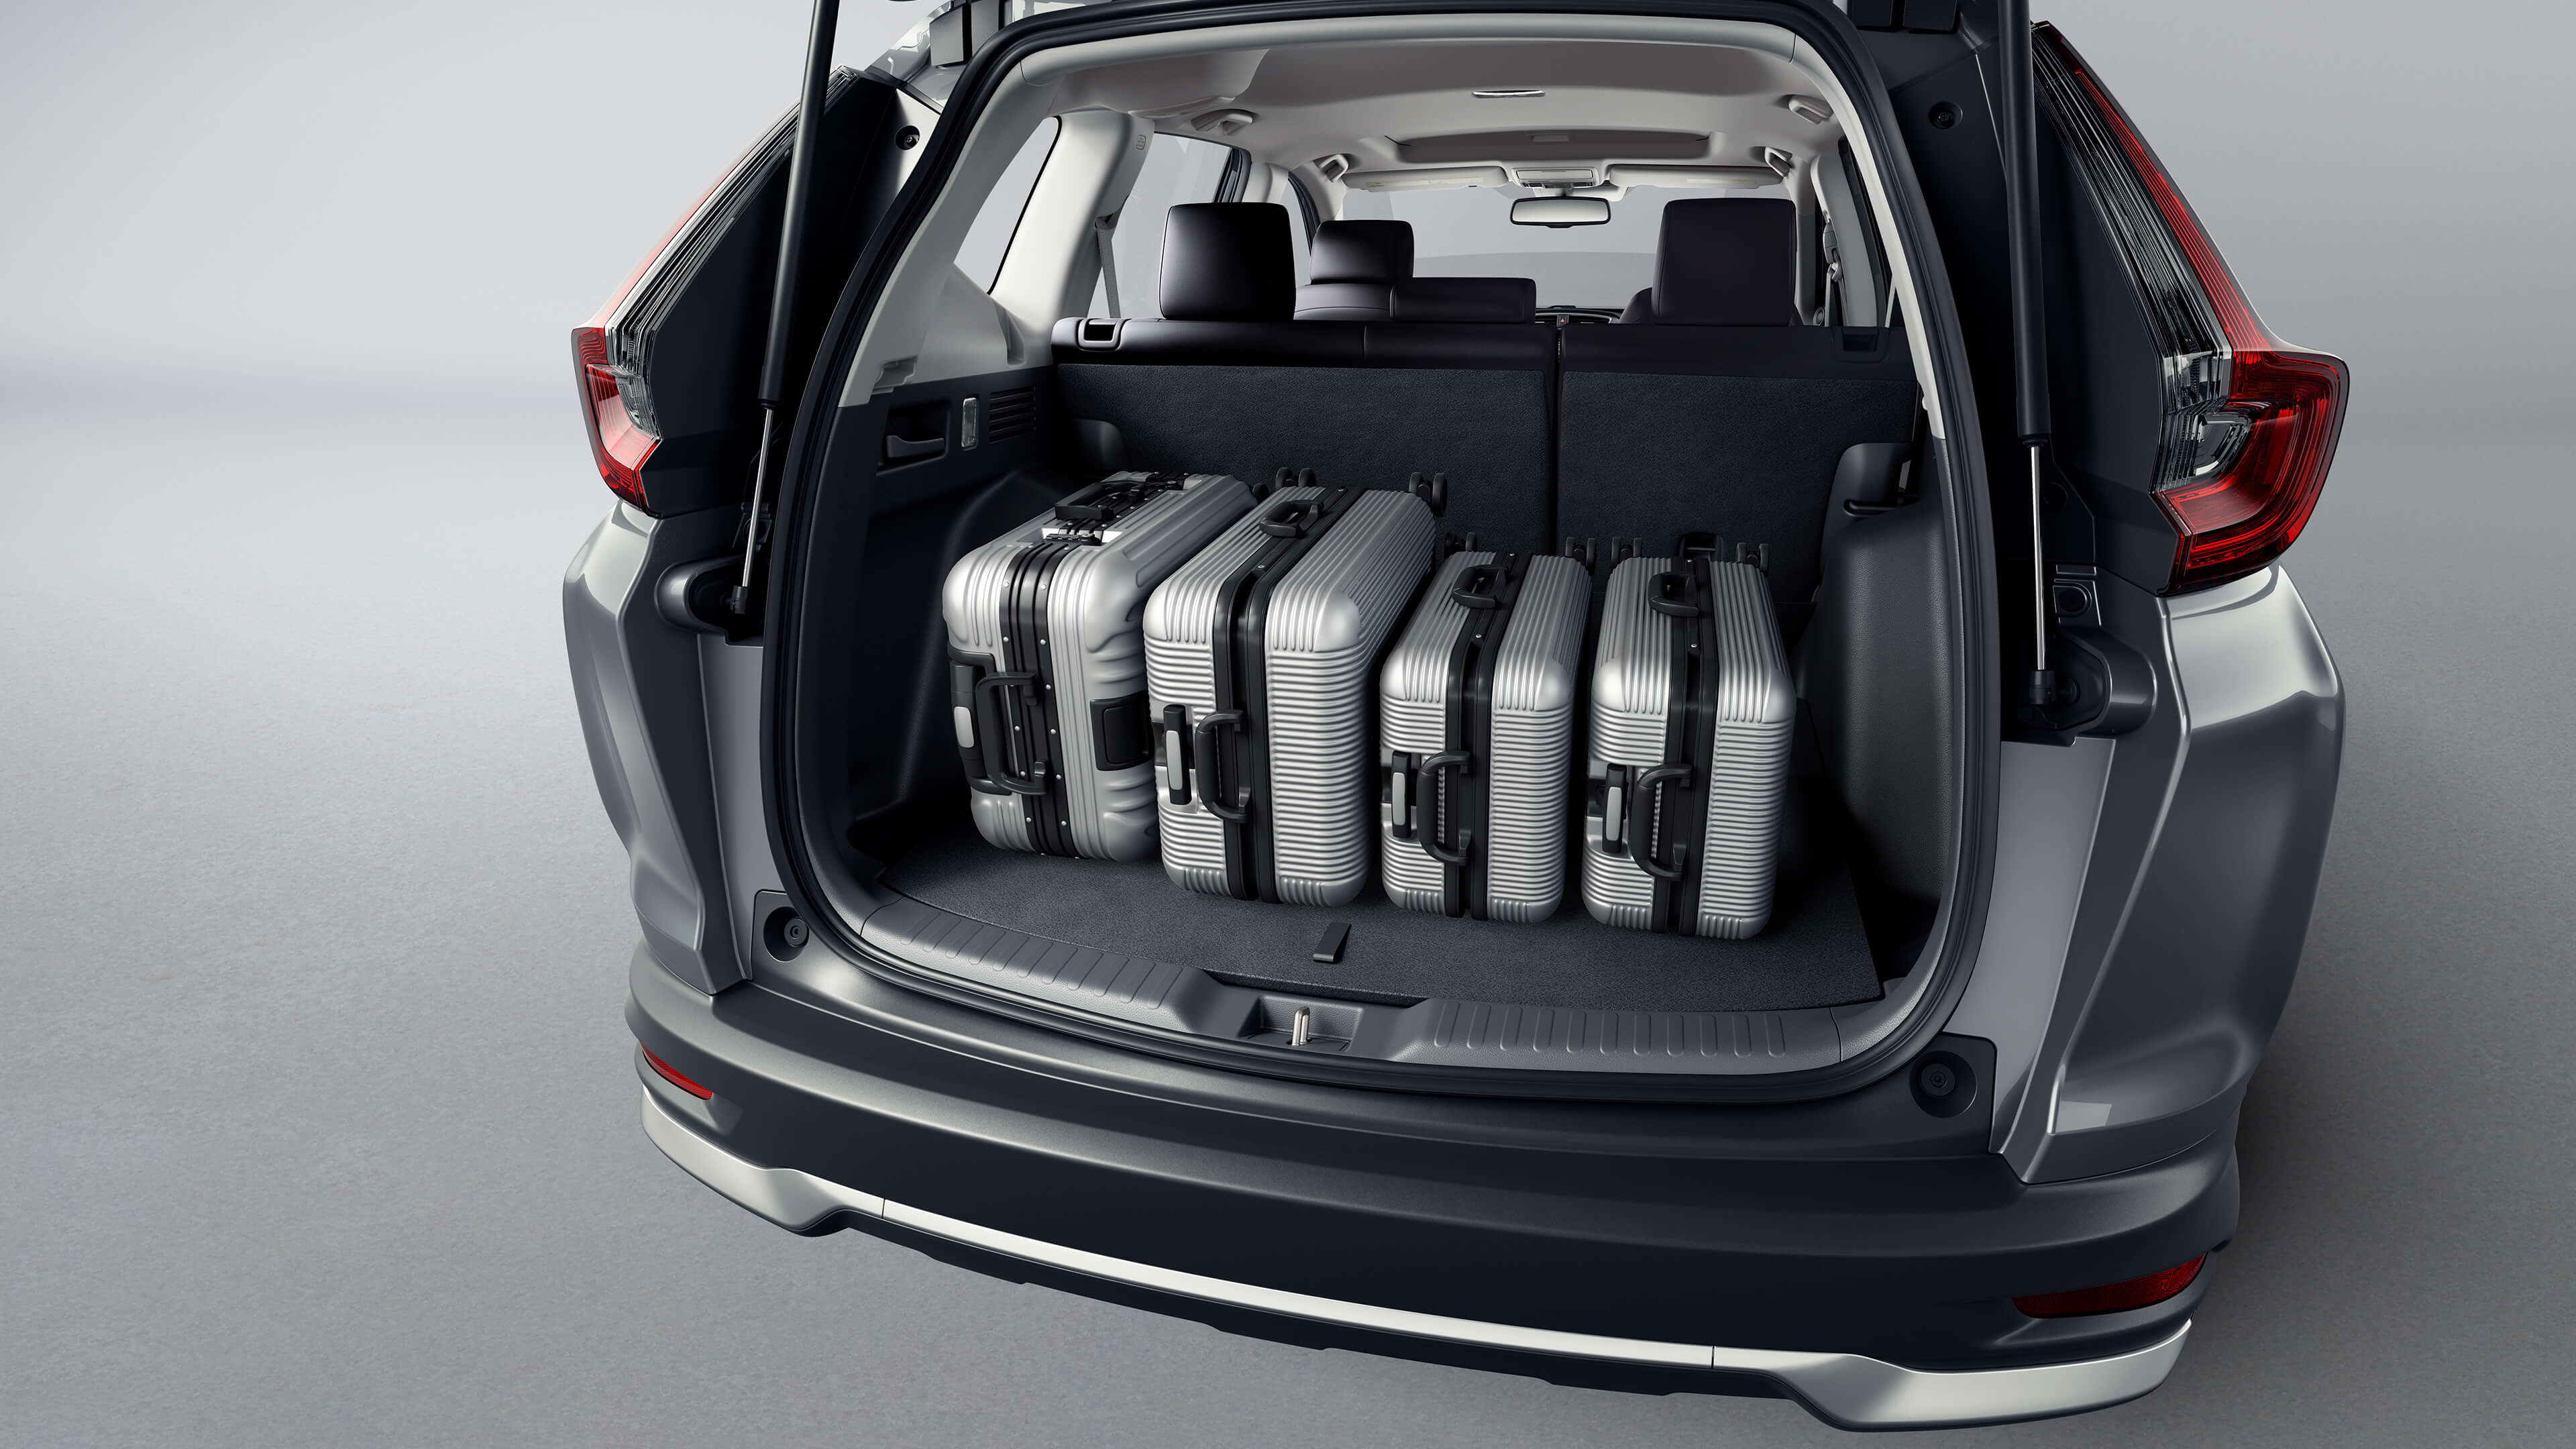 Interior cargo area view of the 2021 Honda CR-V Touring in Modern Steel Metallic, with gear loaded inside.